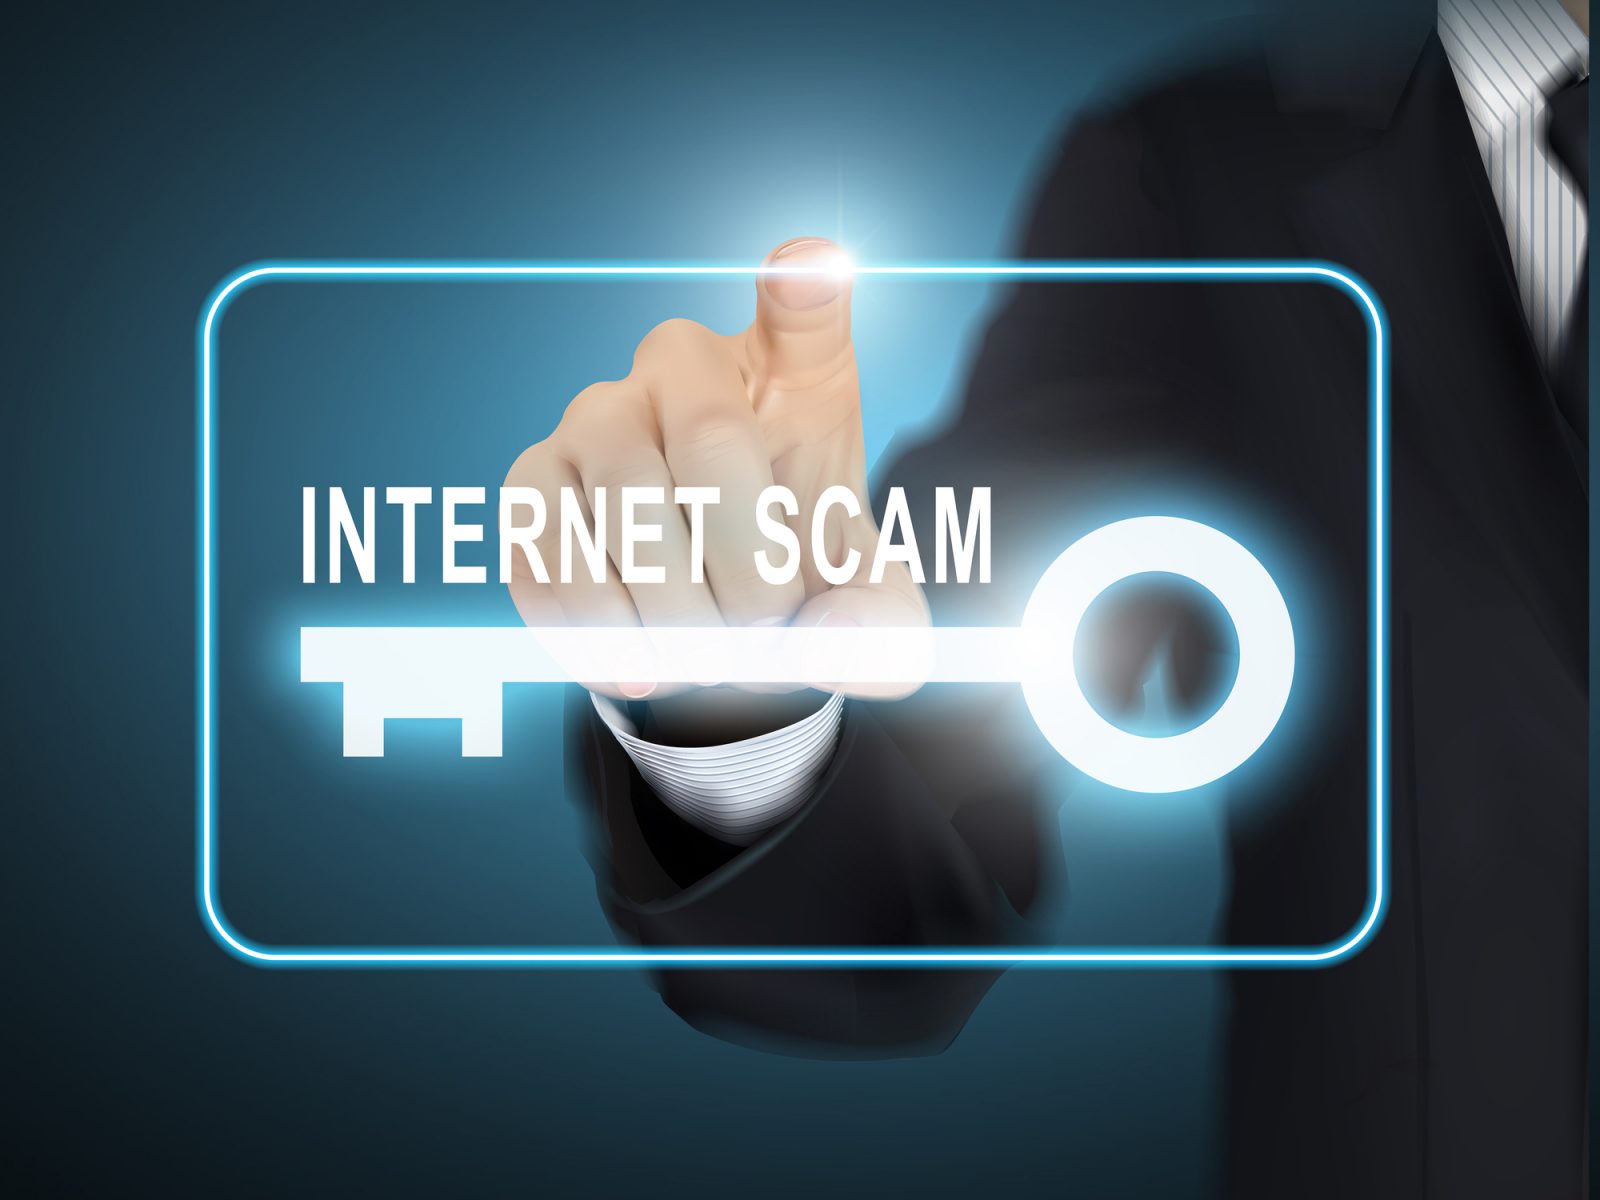 CPS warn of growing trend of online scams